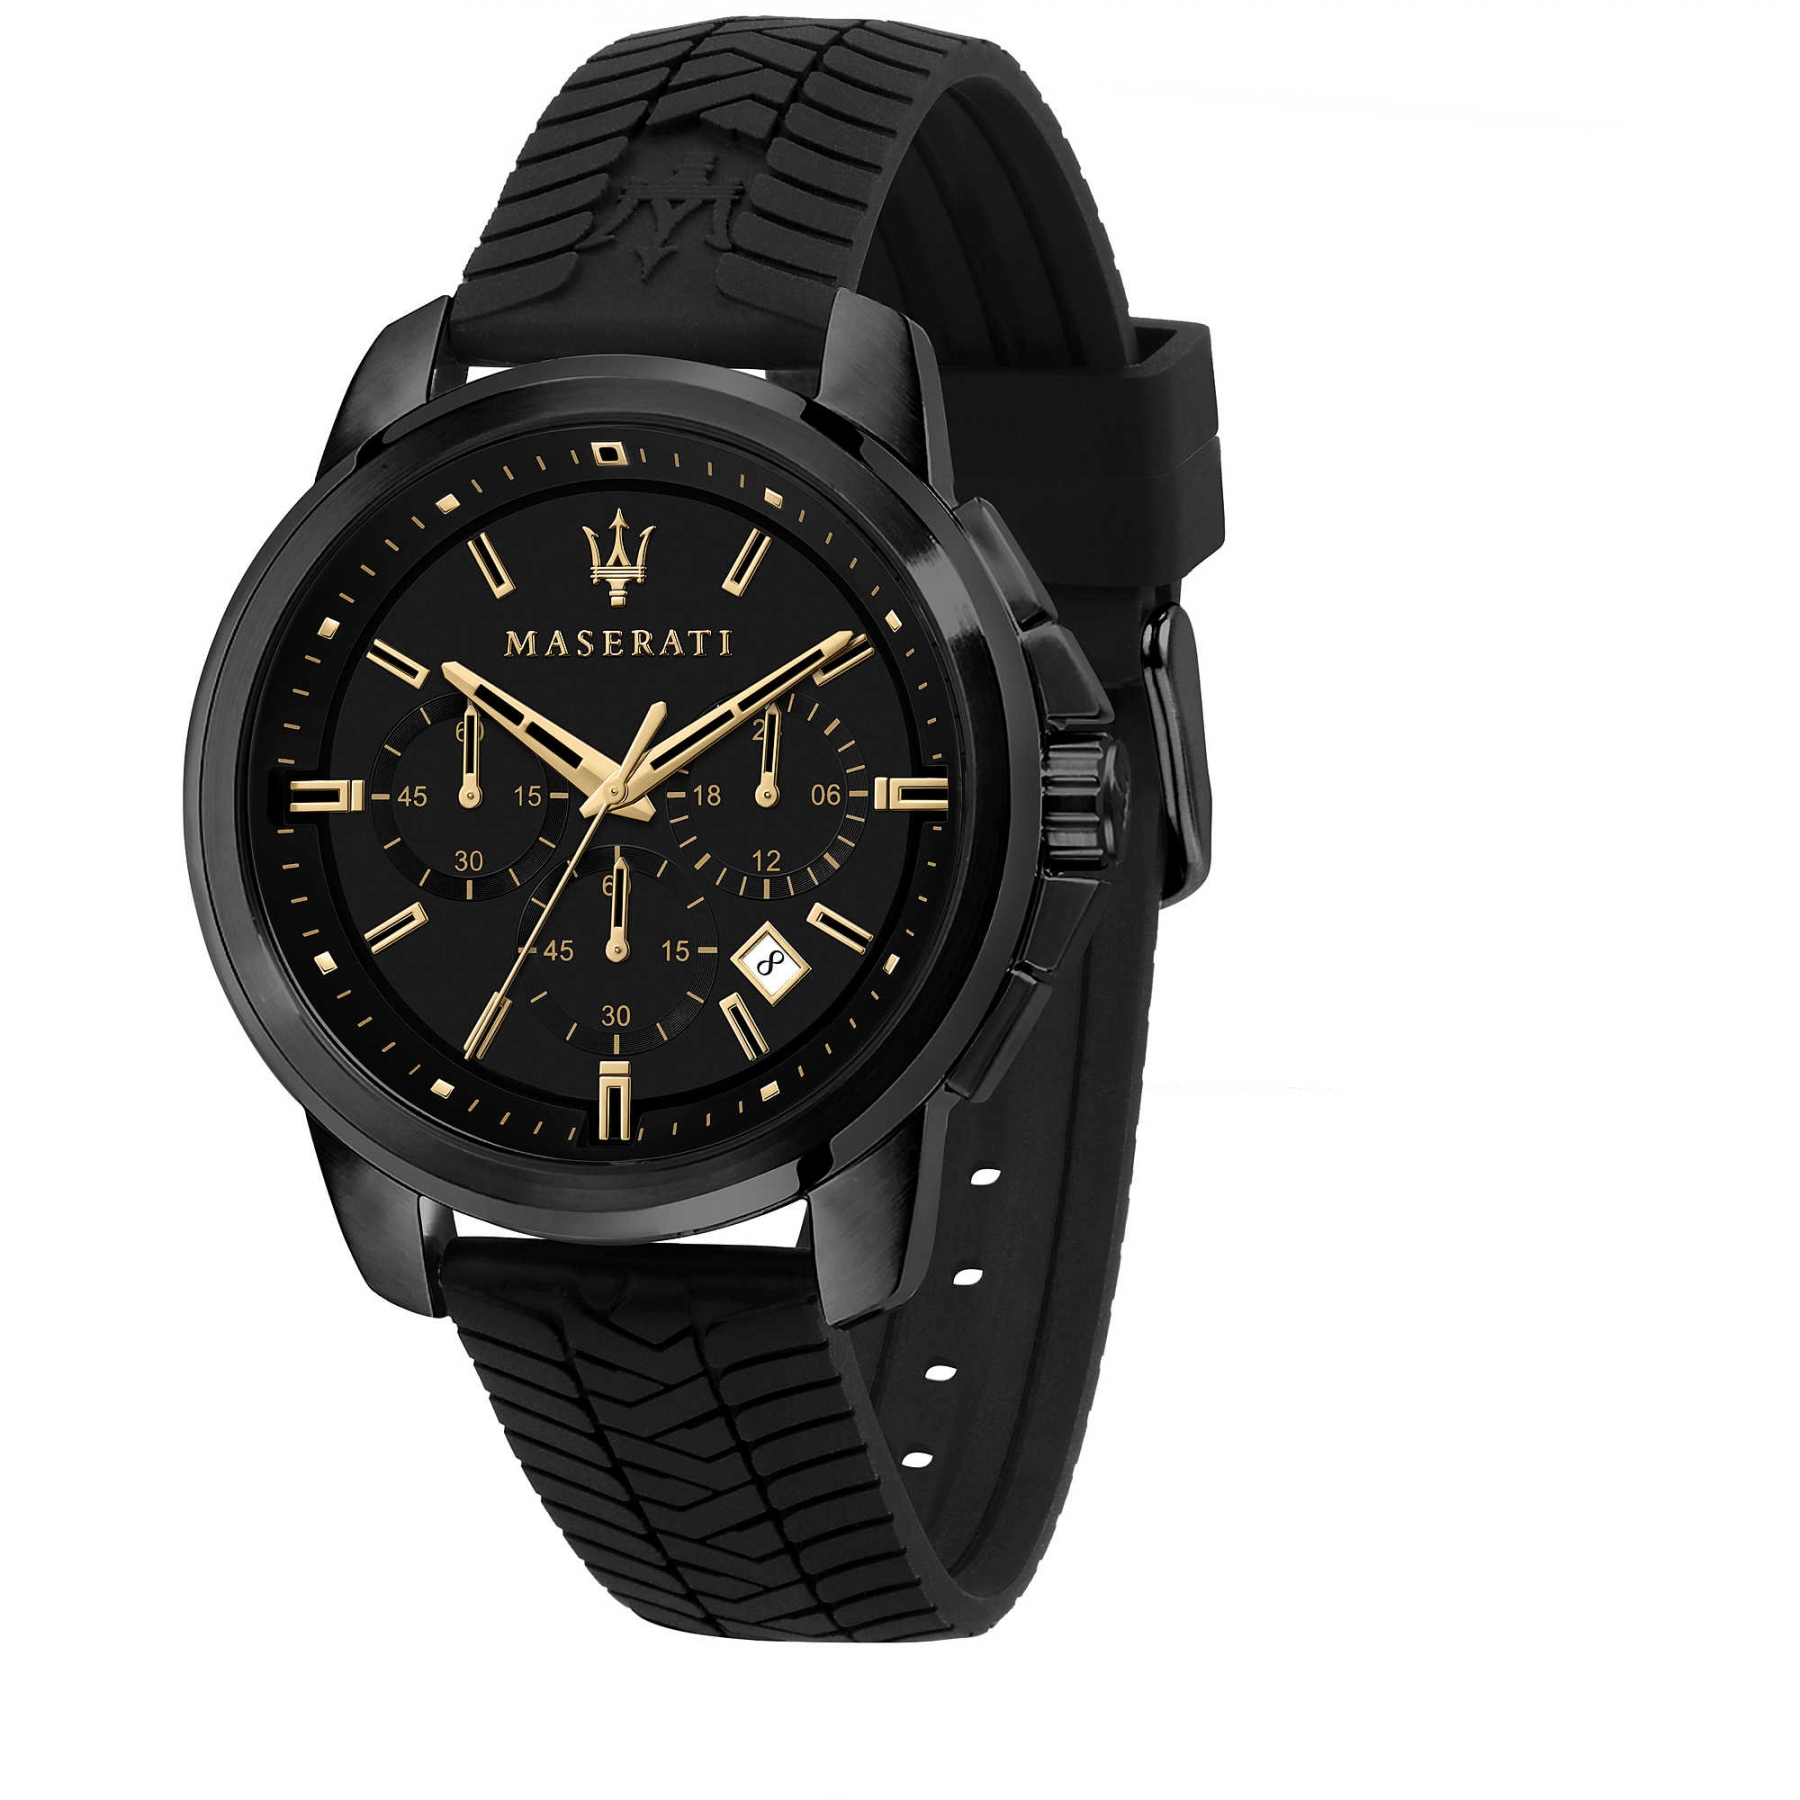 Pef regeling bagage Maserati watch with black rubber strap with gold color details